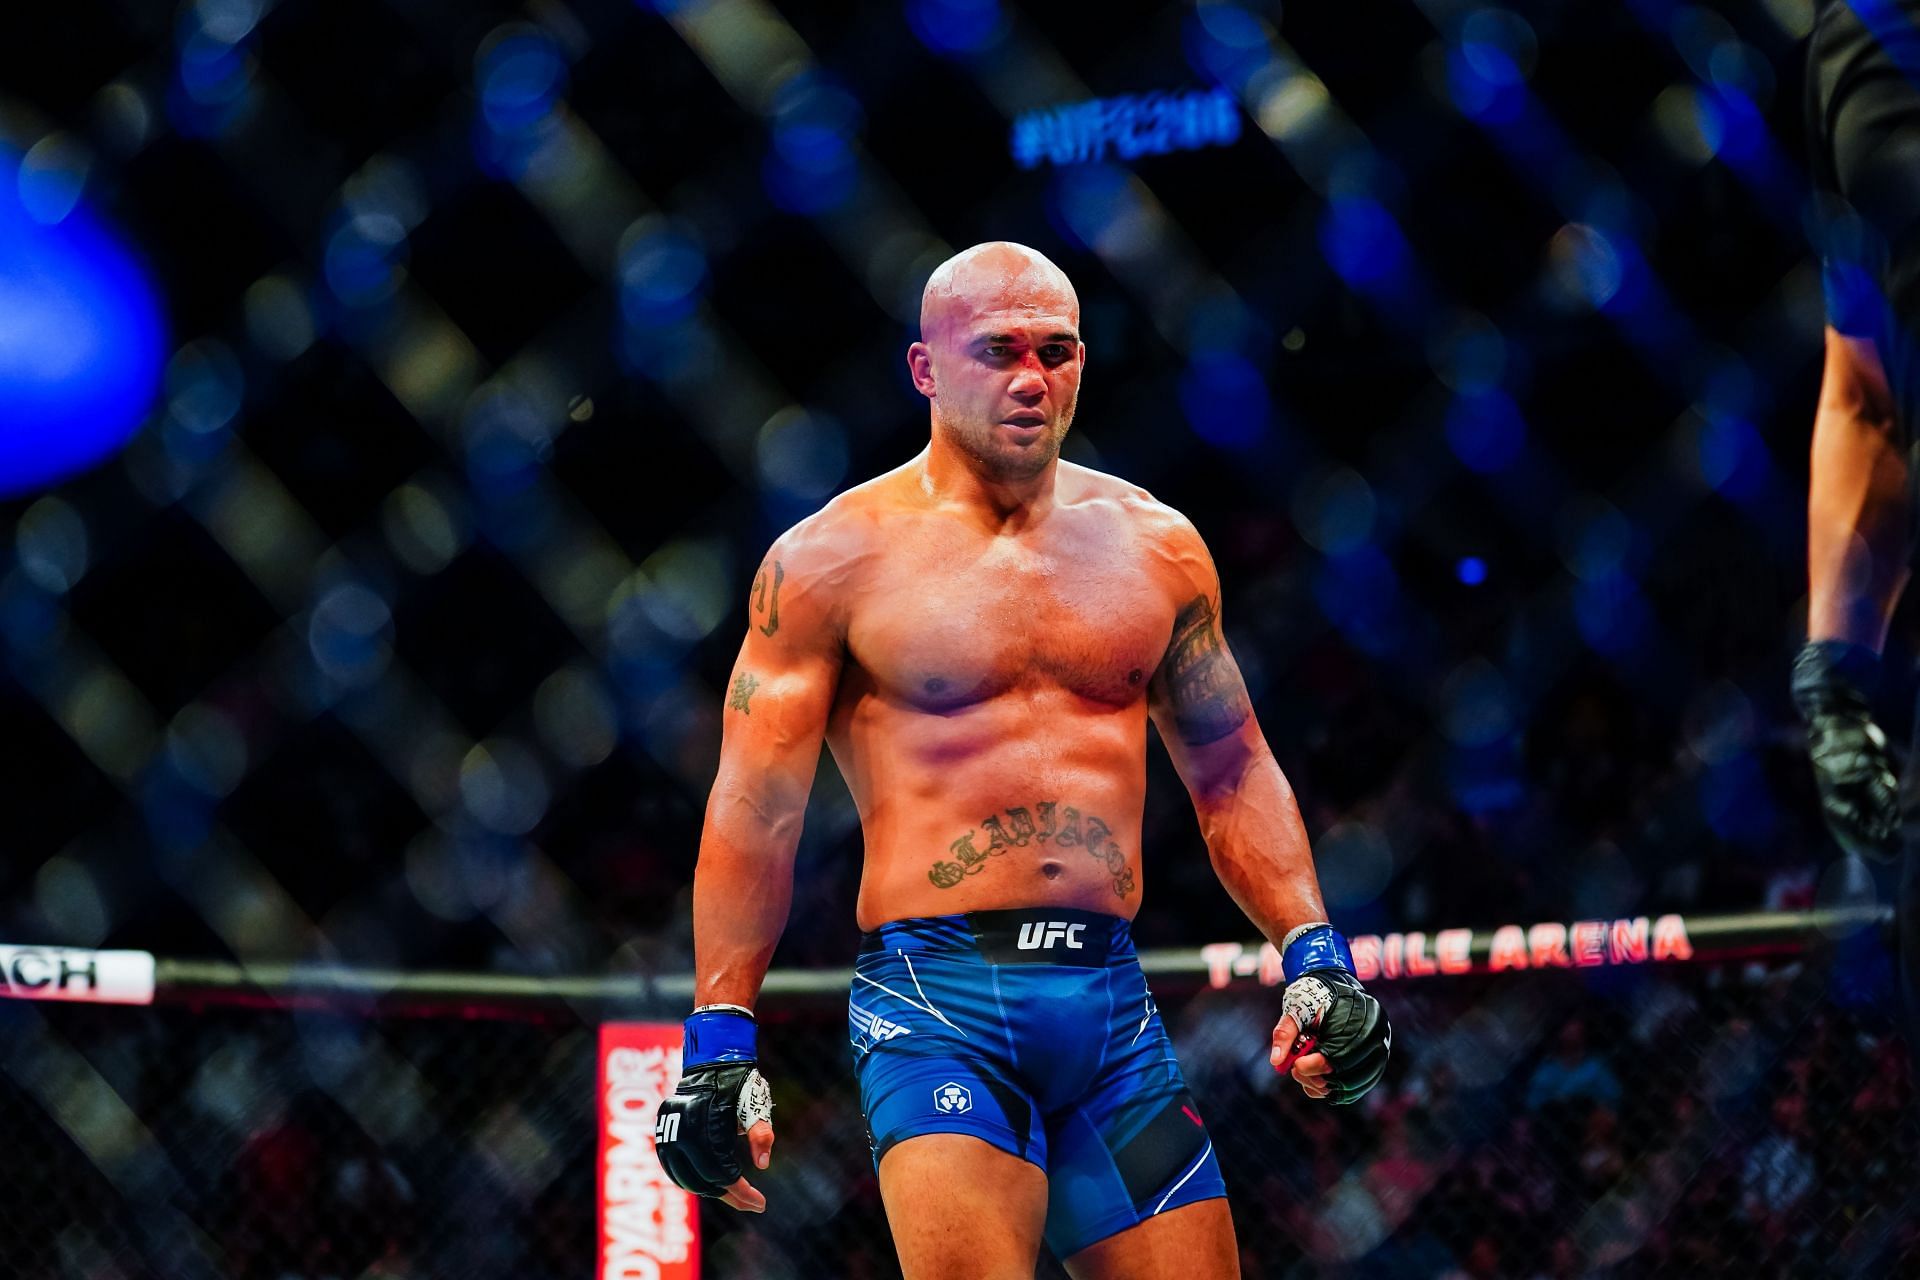 Despite pulling off a big win over Nick Diaz in his last bout, Robbie Lawler is set to feature on the preliminary card this weekend